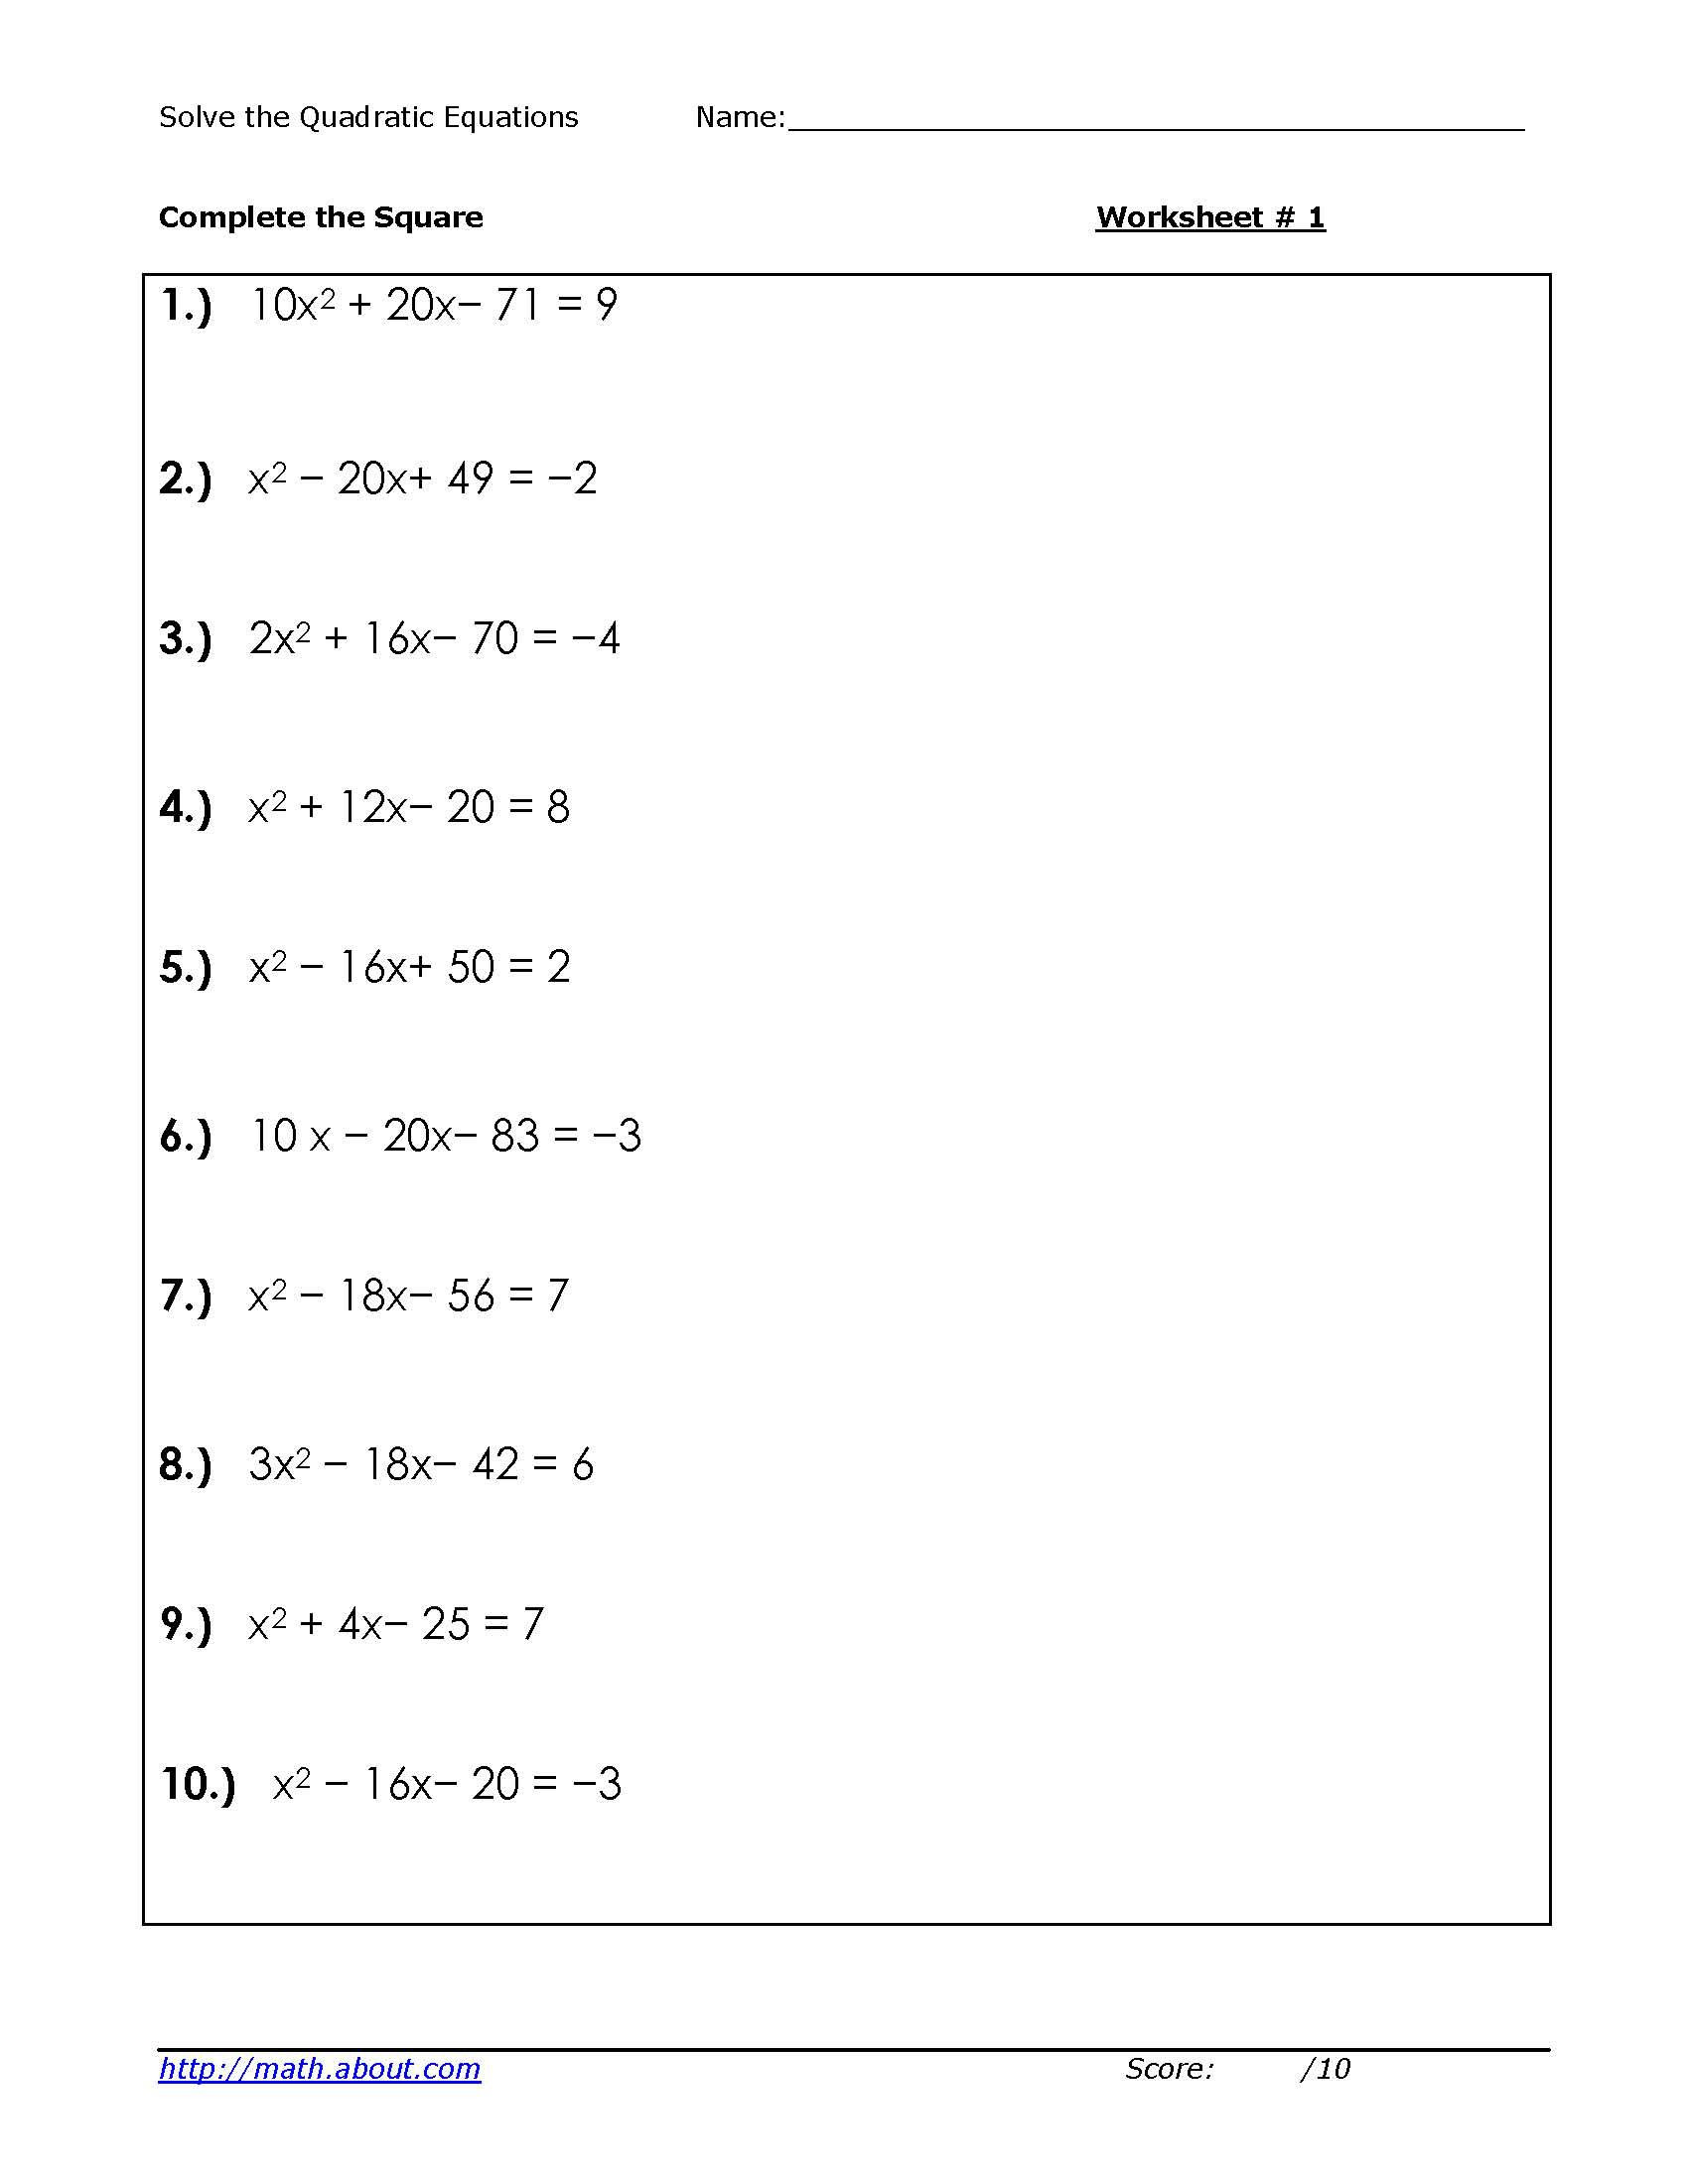 Completing the Square Practice Worksheet solve Quadratic Equations by Peting the Square Worksheets